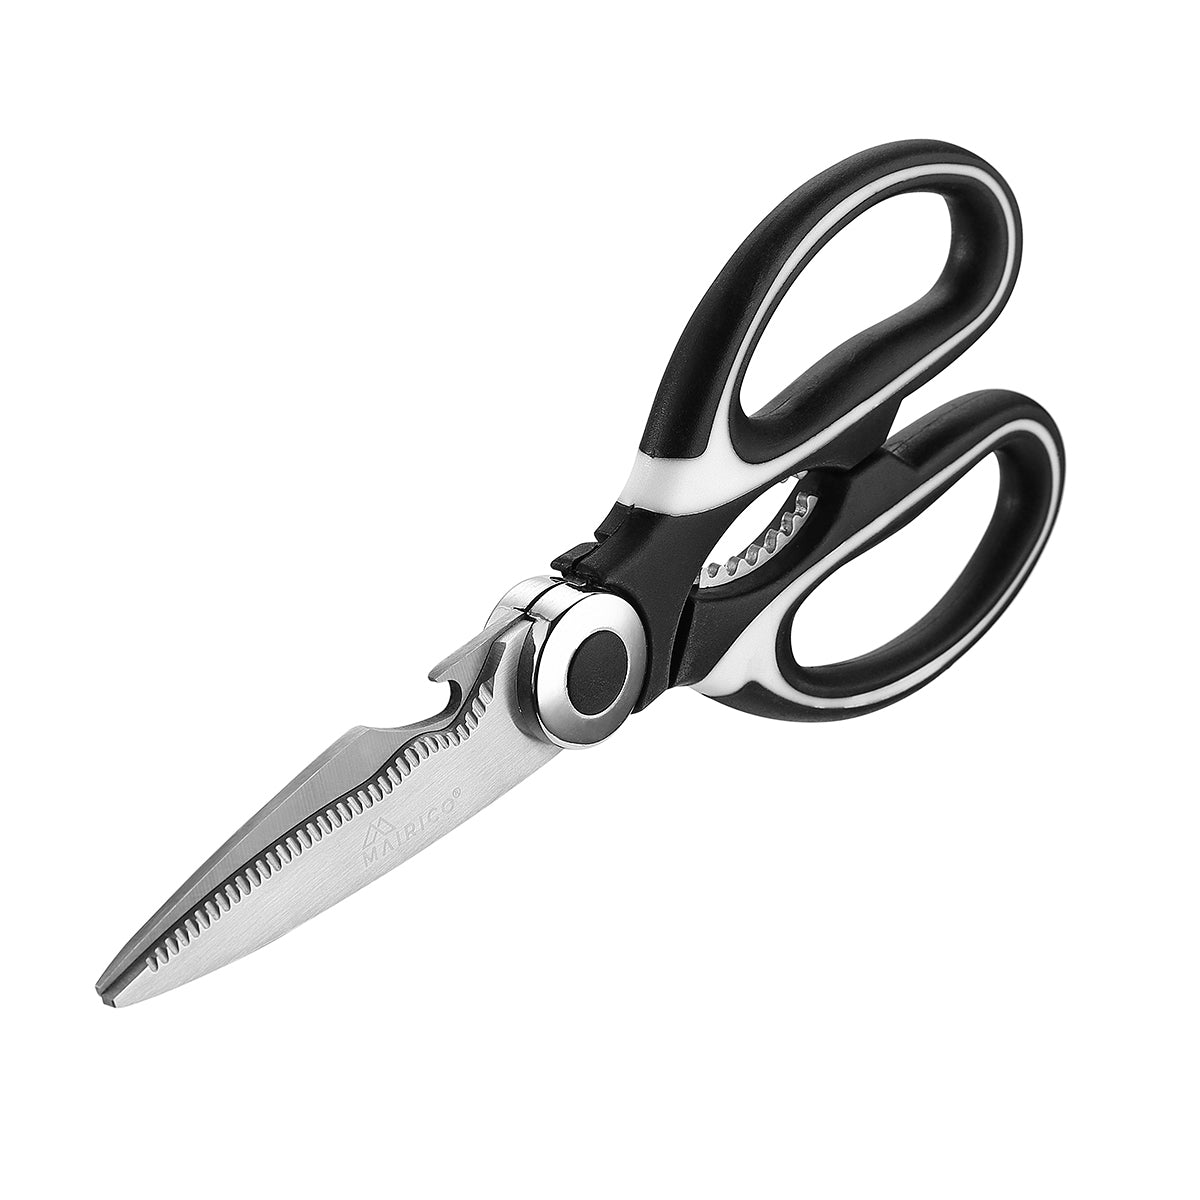 MAIRICO Super Heavy Duty Spring Loaded Poultry Kitchen Shears